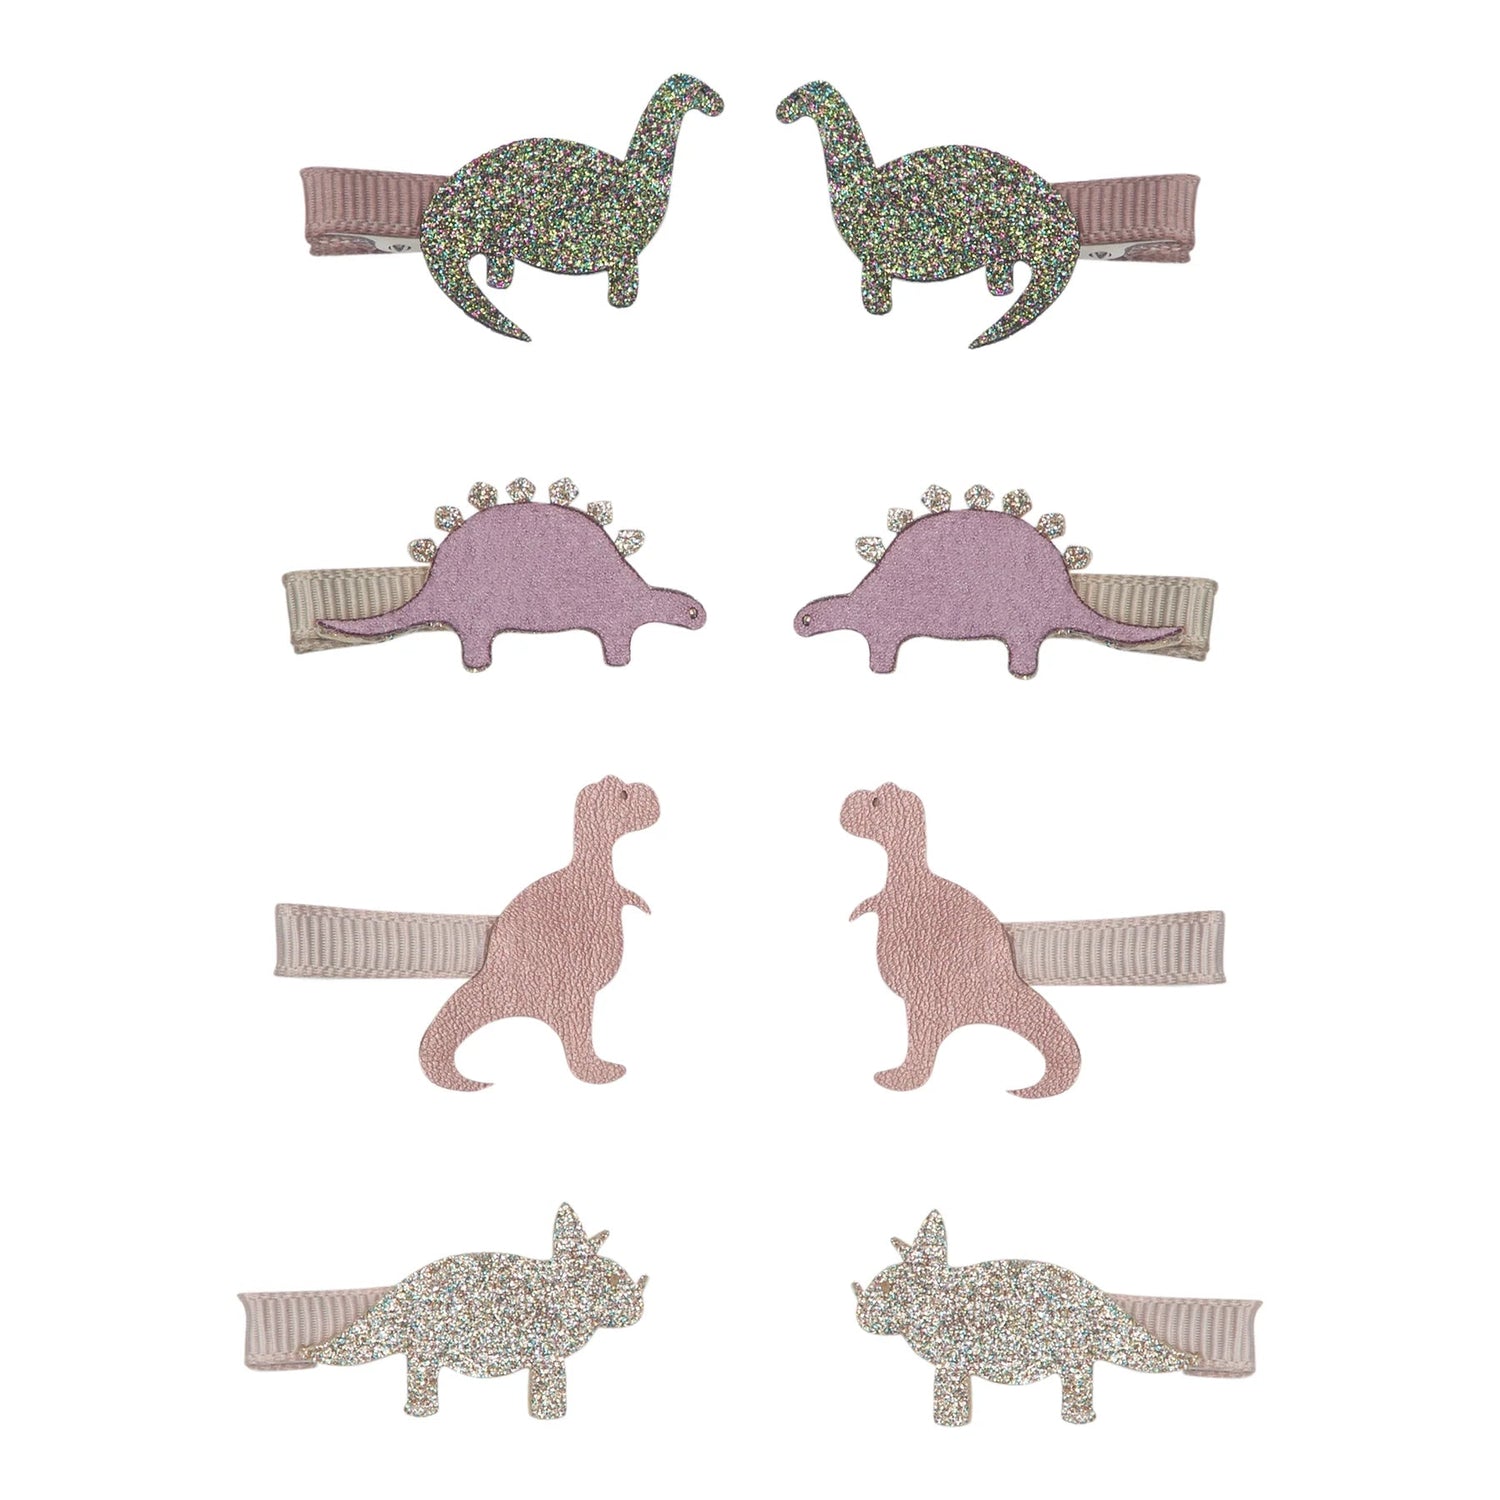 MIMI & LULA | DINO FRIEND MINI HAIR CLIPS - DINOS & BUTTERFLIES *PRE-ORDER* by MIMI & LULA - The Playful Collective